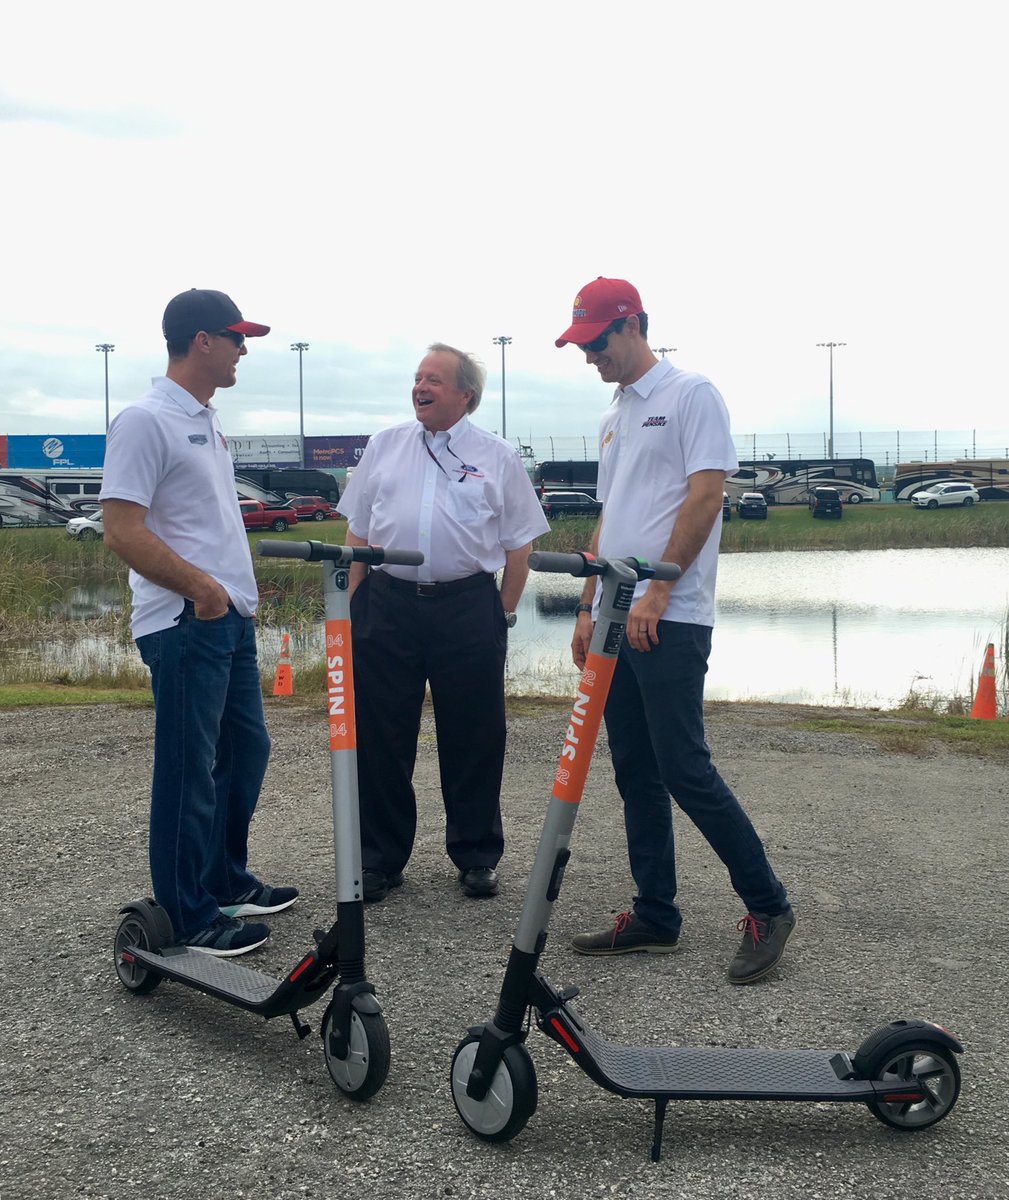 Edsel Ford presenting ⁦@ridespin⁩  scooters to ⁦@KevinHarvick⁩ and  ⁦@joeylogano⁩. #NASCAR #FordChampWknd ⁦@FordPerformance⁩